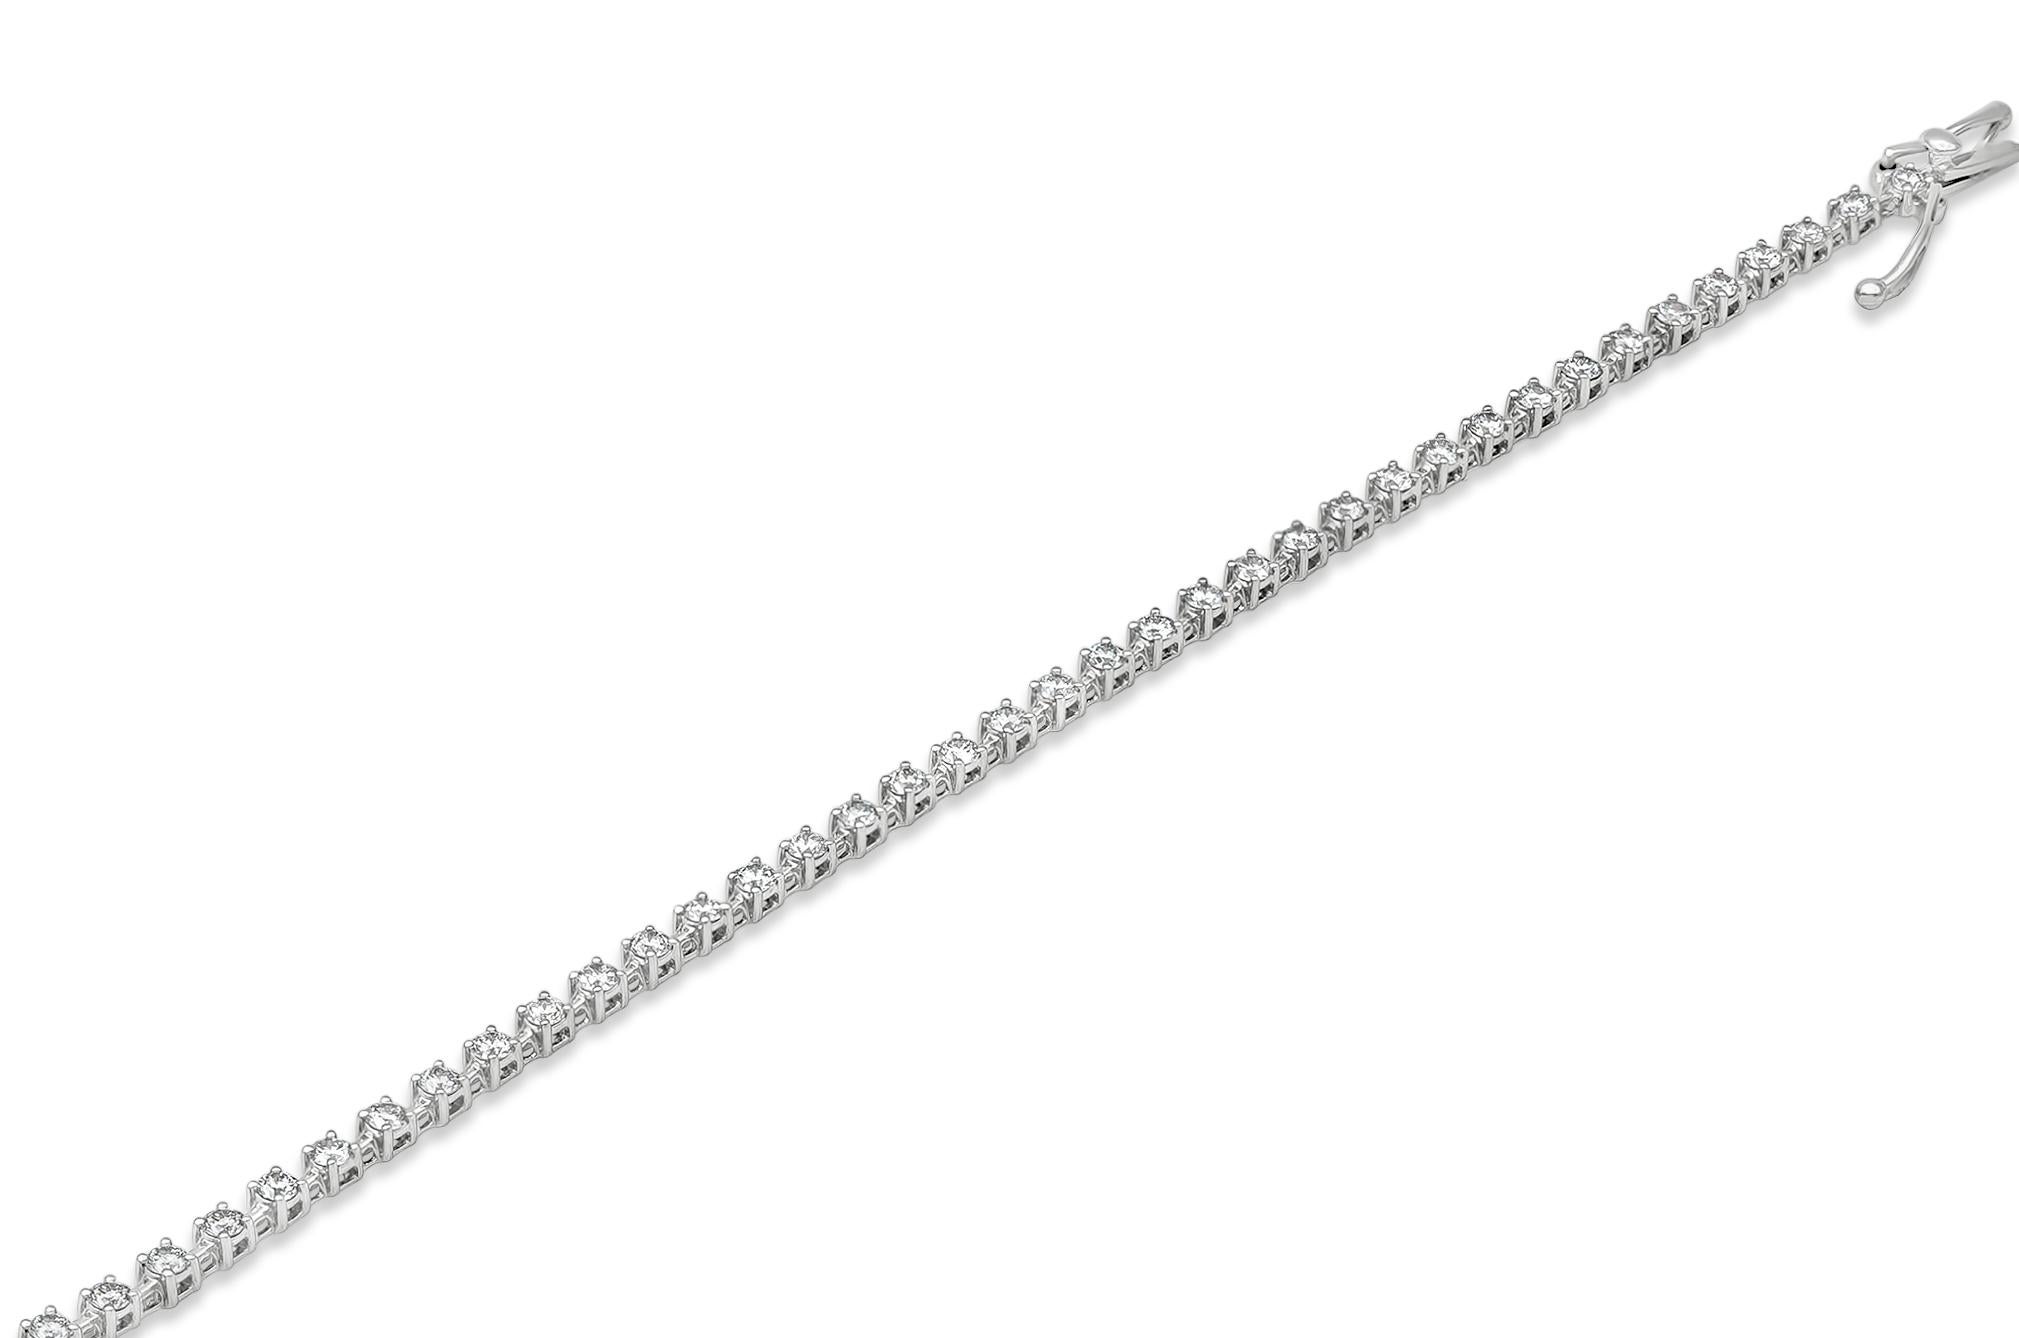 Classic tennis bracelet showcasing a row of round brilliant diamonds weighing 1.67 carats total, set in an 18k white gold mounting. Diamonds are approximately F color, VS clarity. 

Style available in different price ranges. Prices are based on your